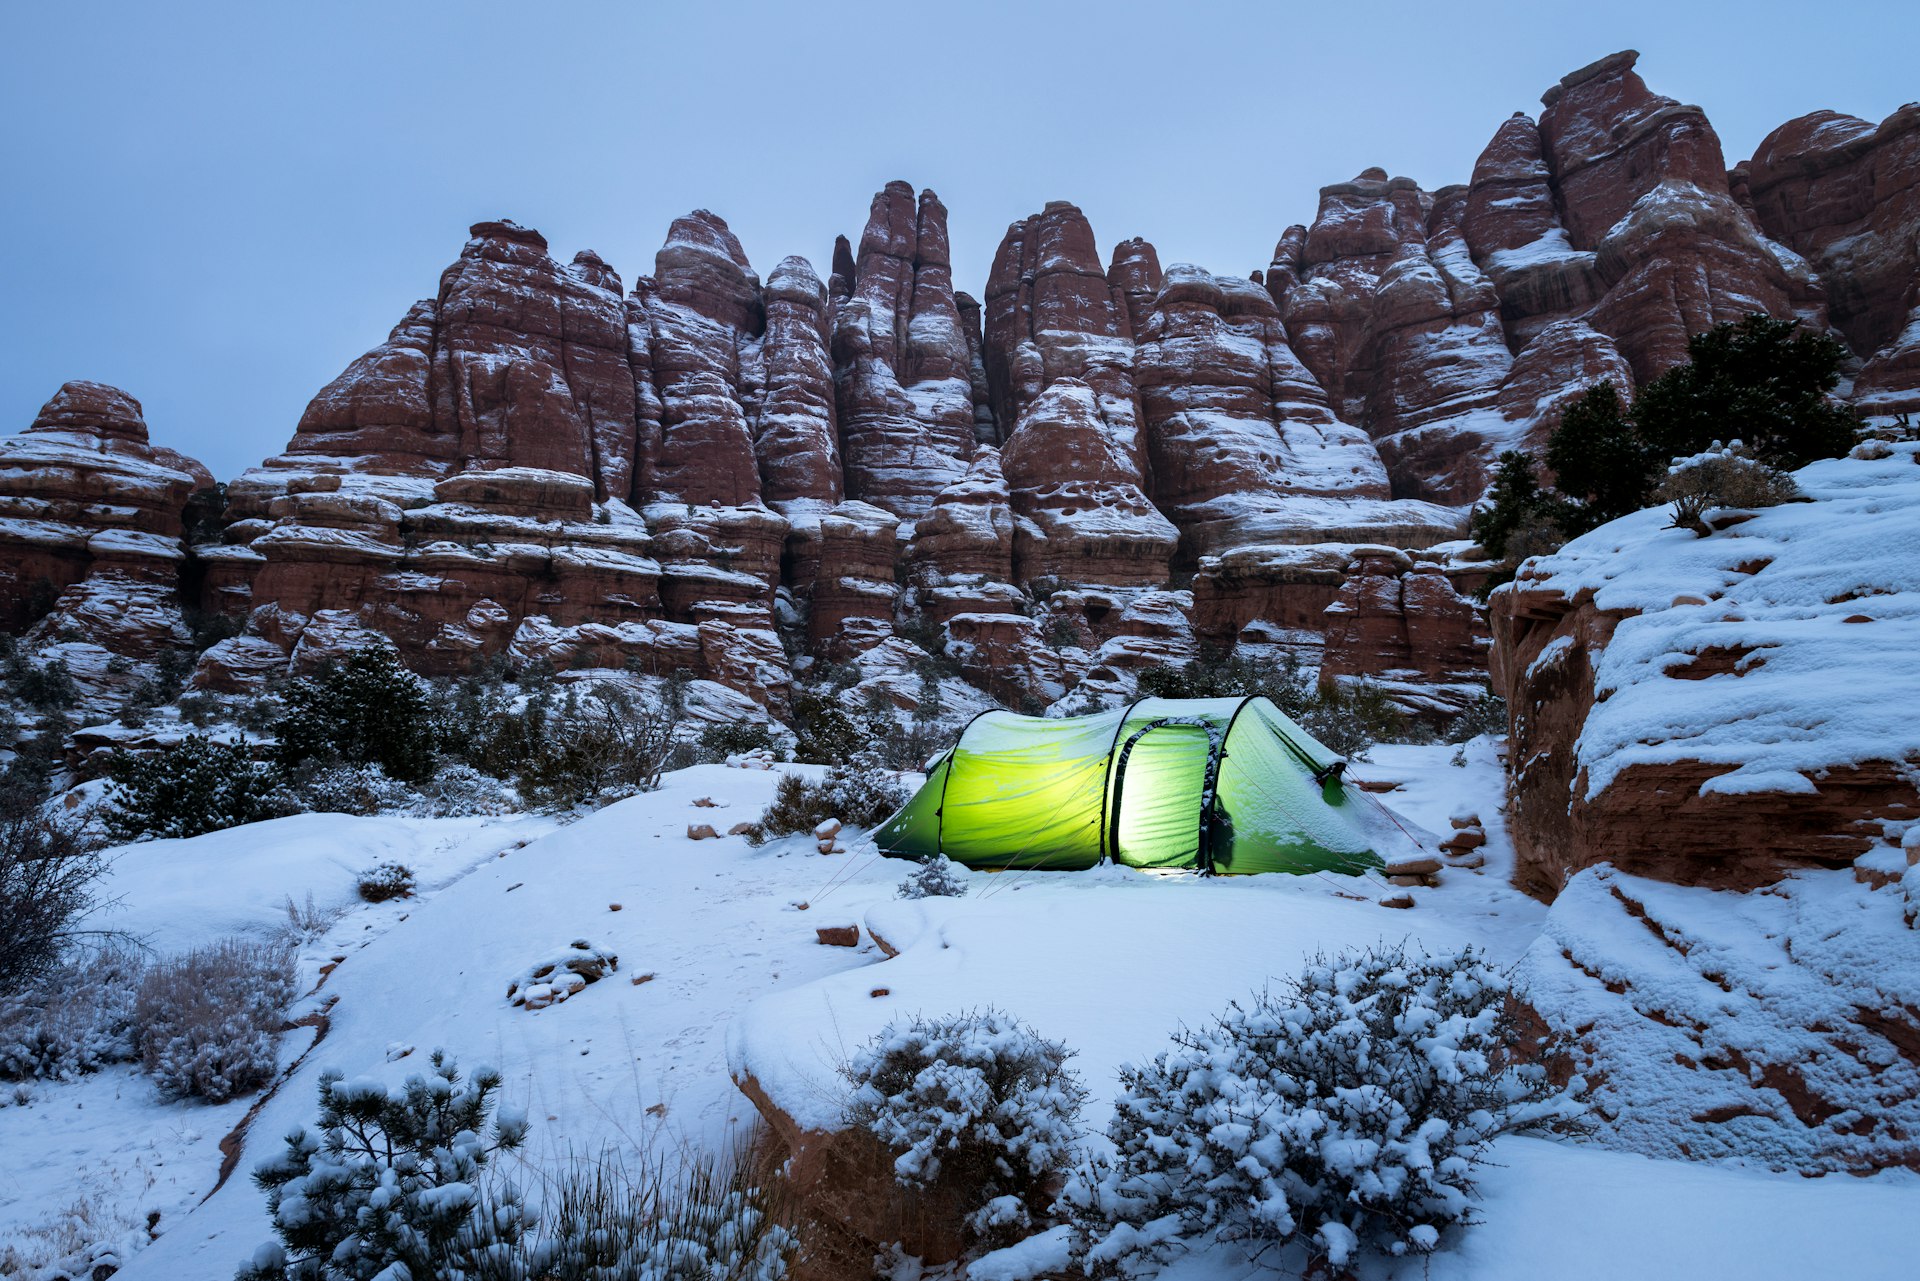 A snow-covered tent after dark in the Utah desert.